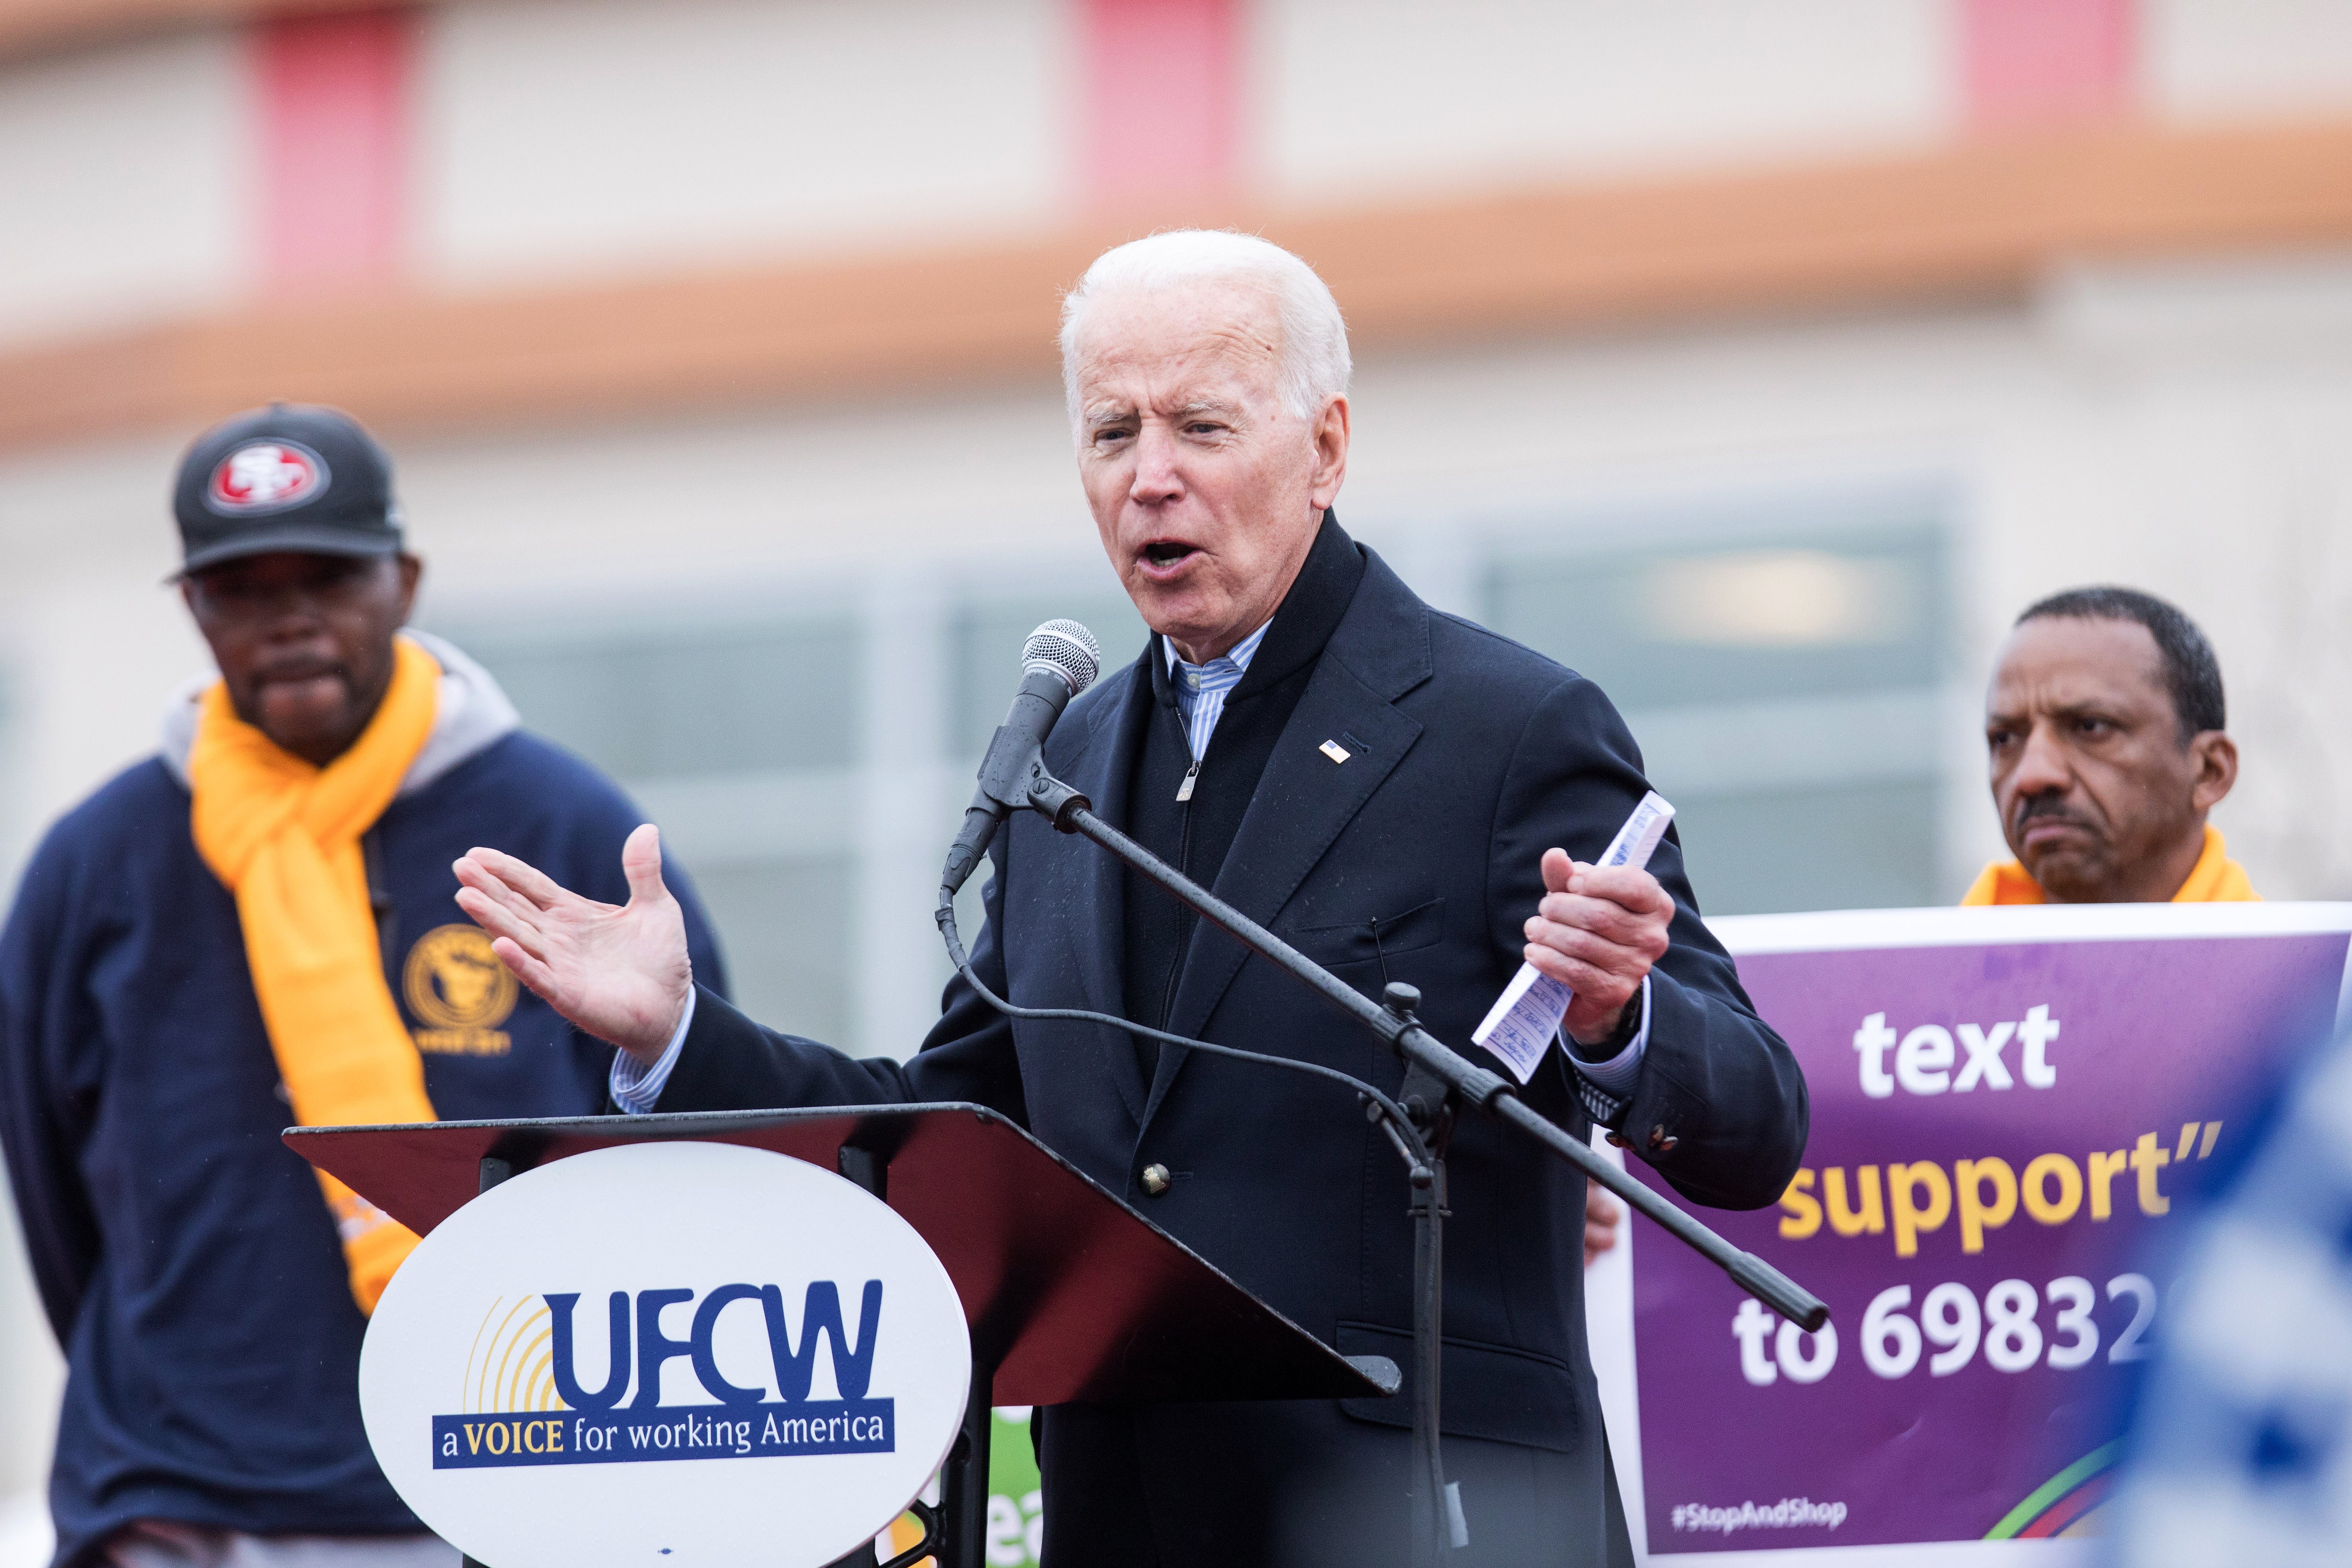 Former Vice President Joe Biden speaks in front of a Stop & Shop in support of union workers on April 18, 2019 in Dorchester, Massachusetts. (Scott Eisen/Getty Images)